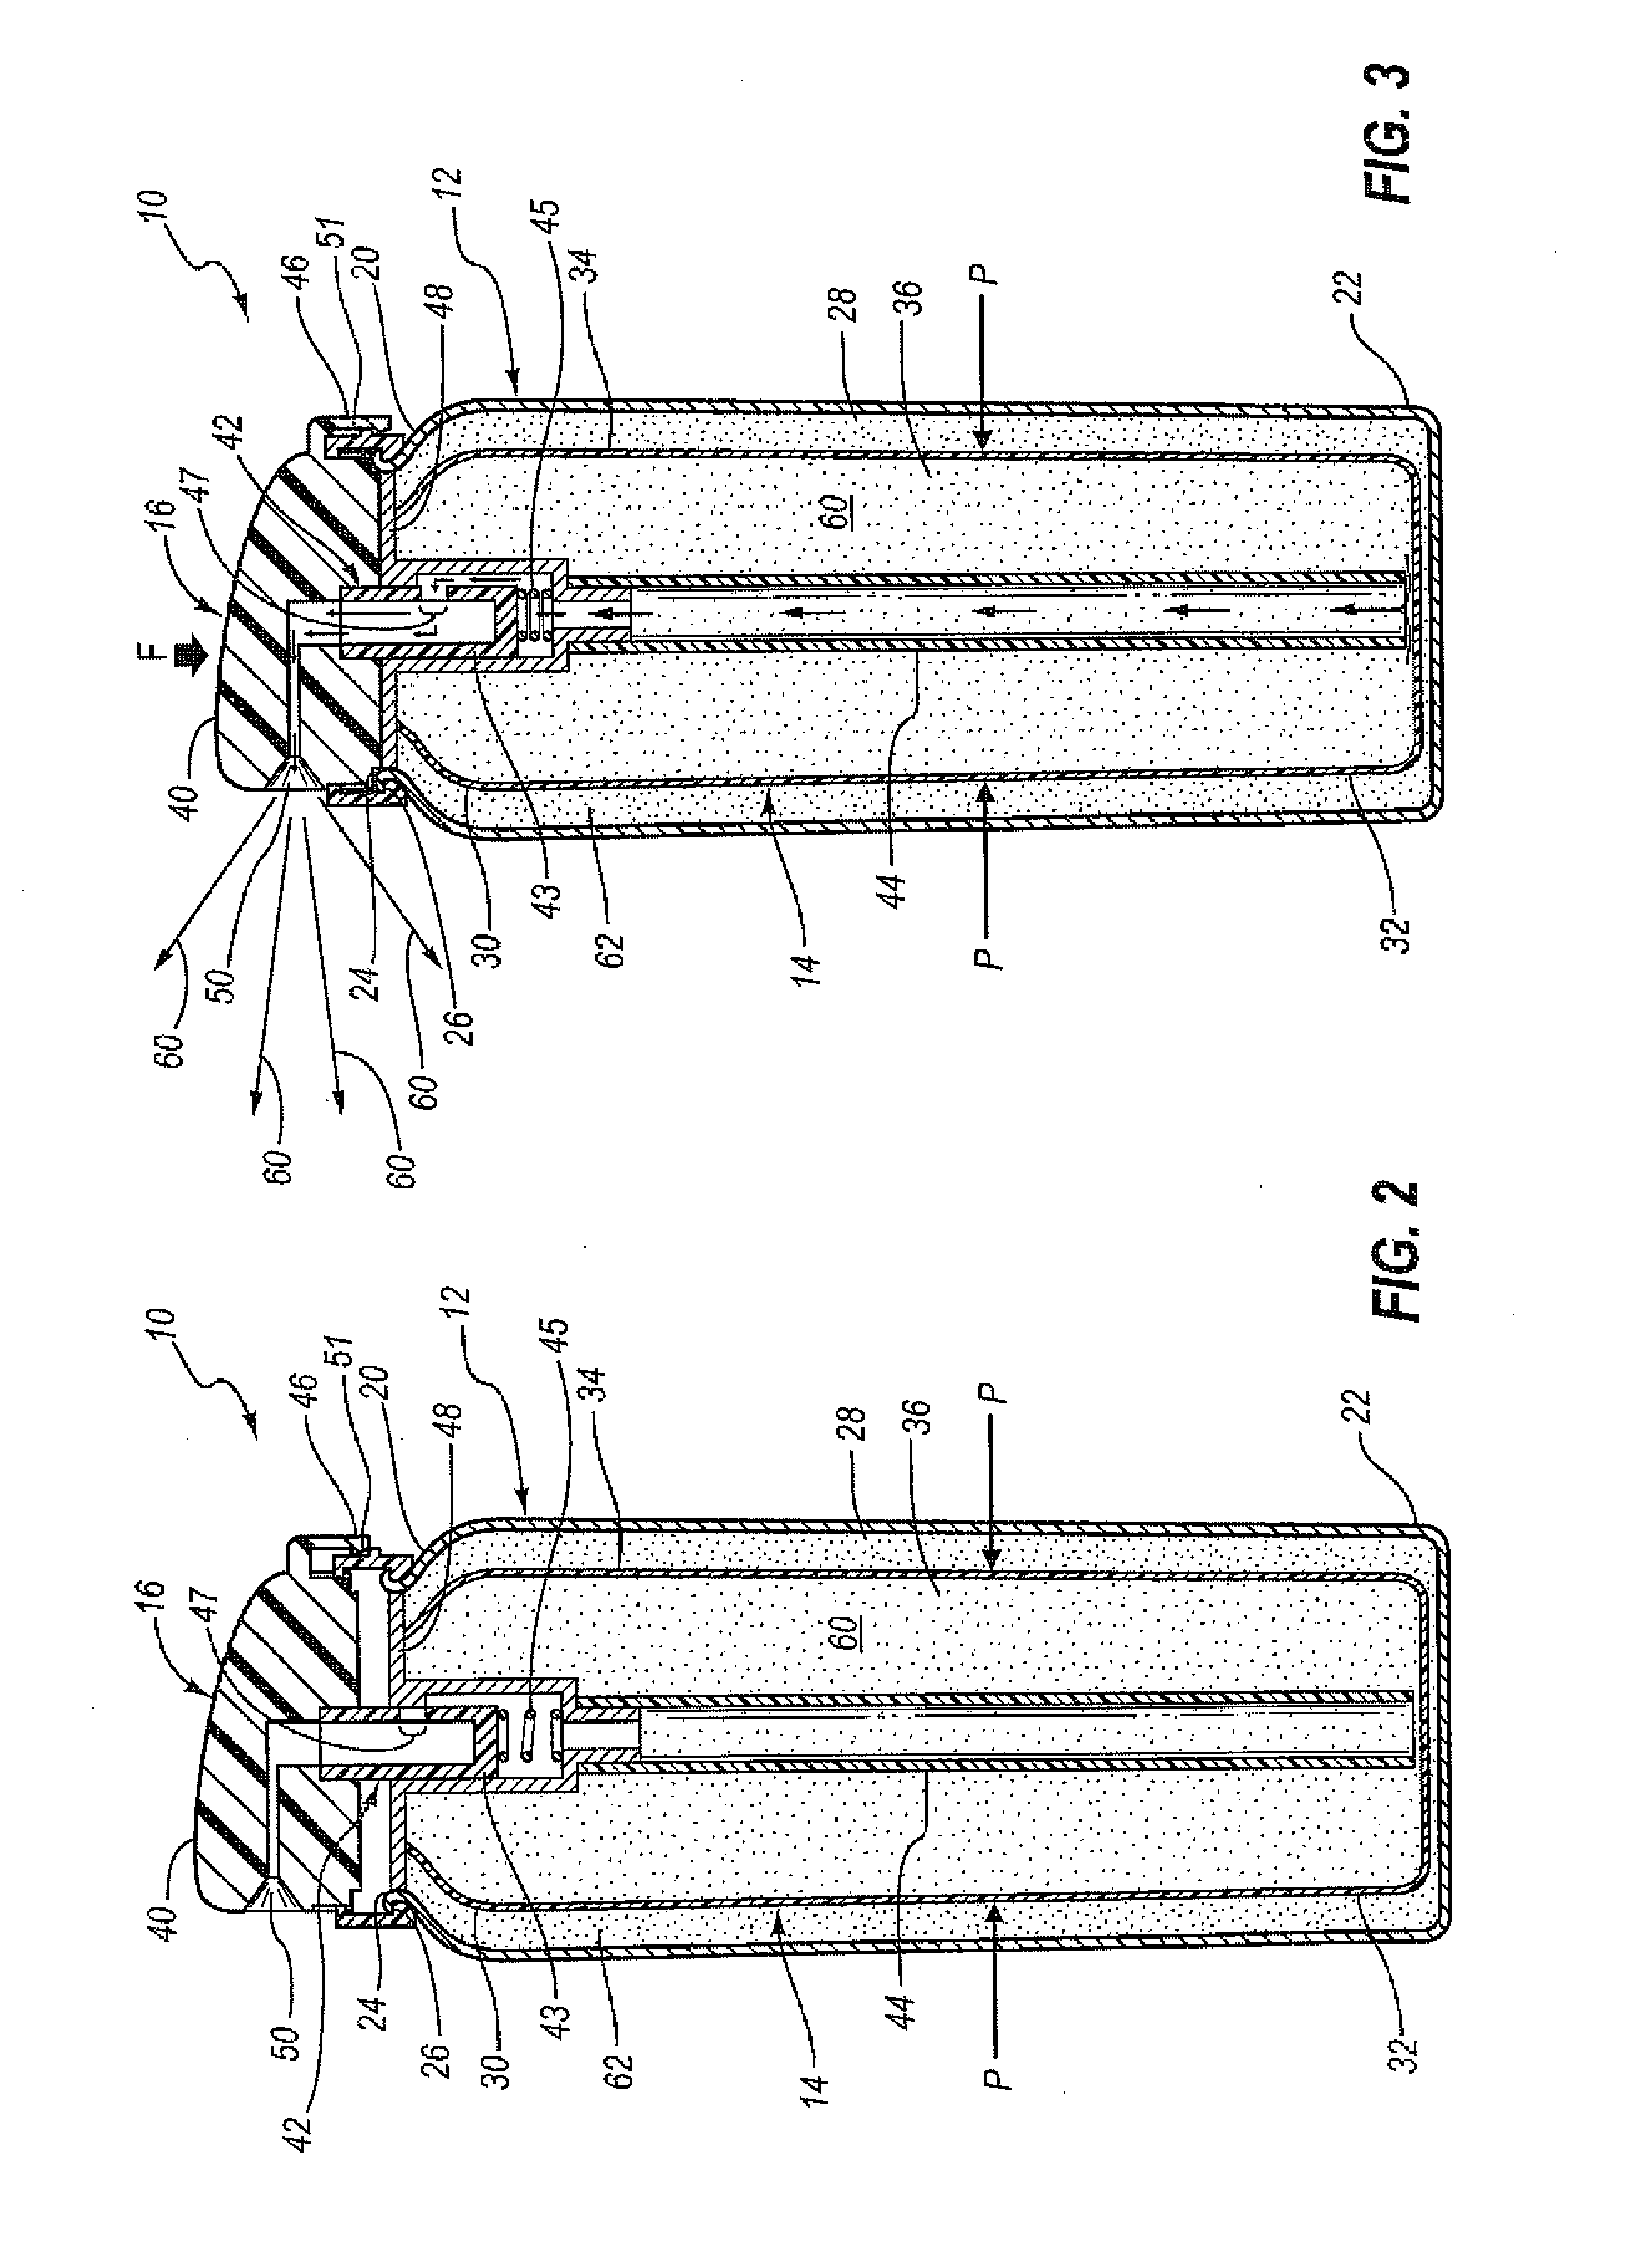 Scent fluid dispensing system and methods